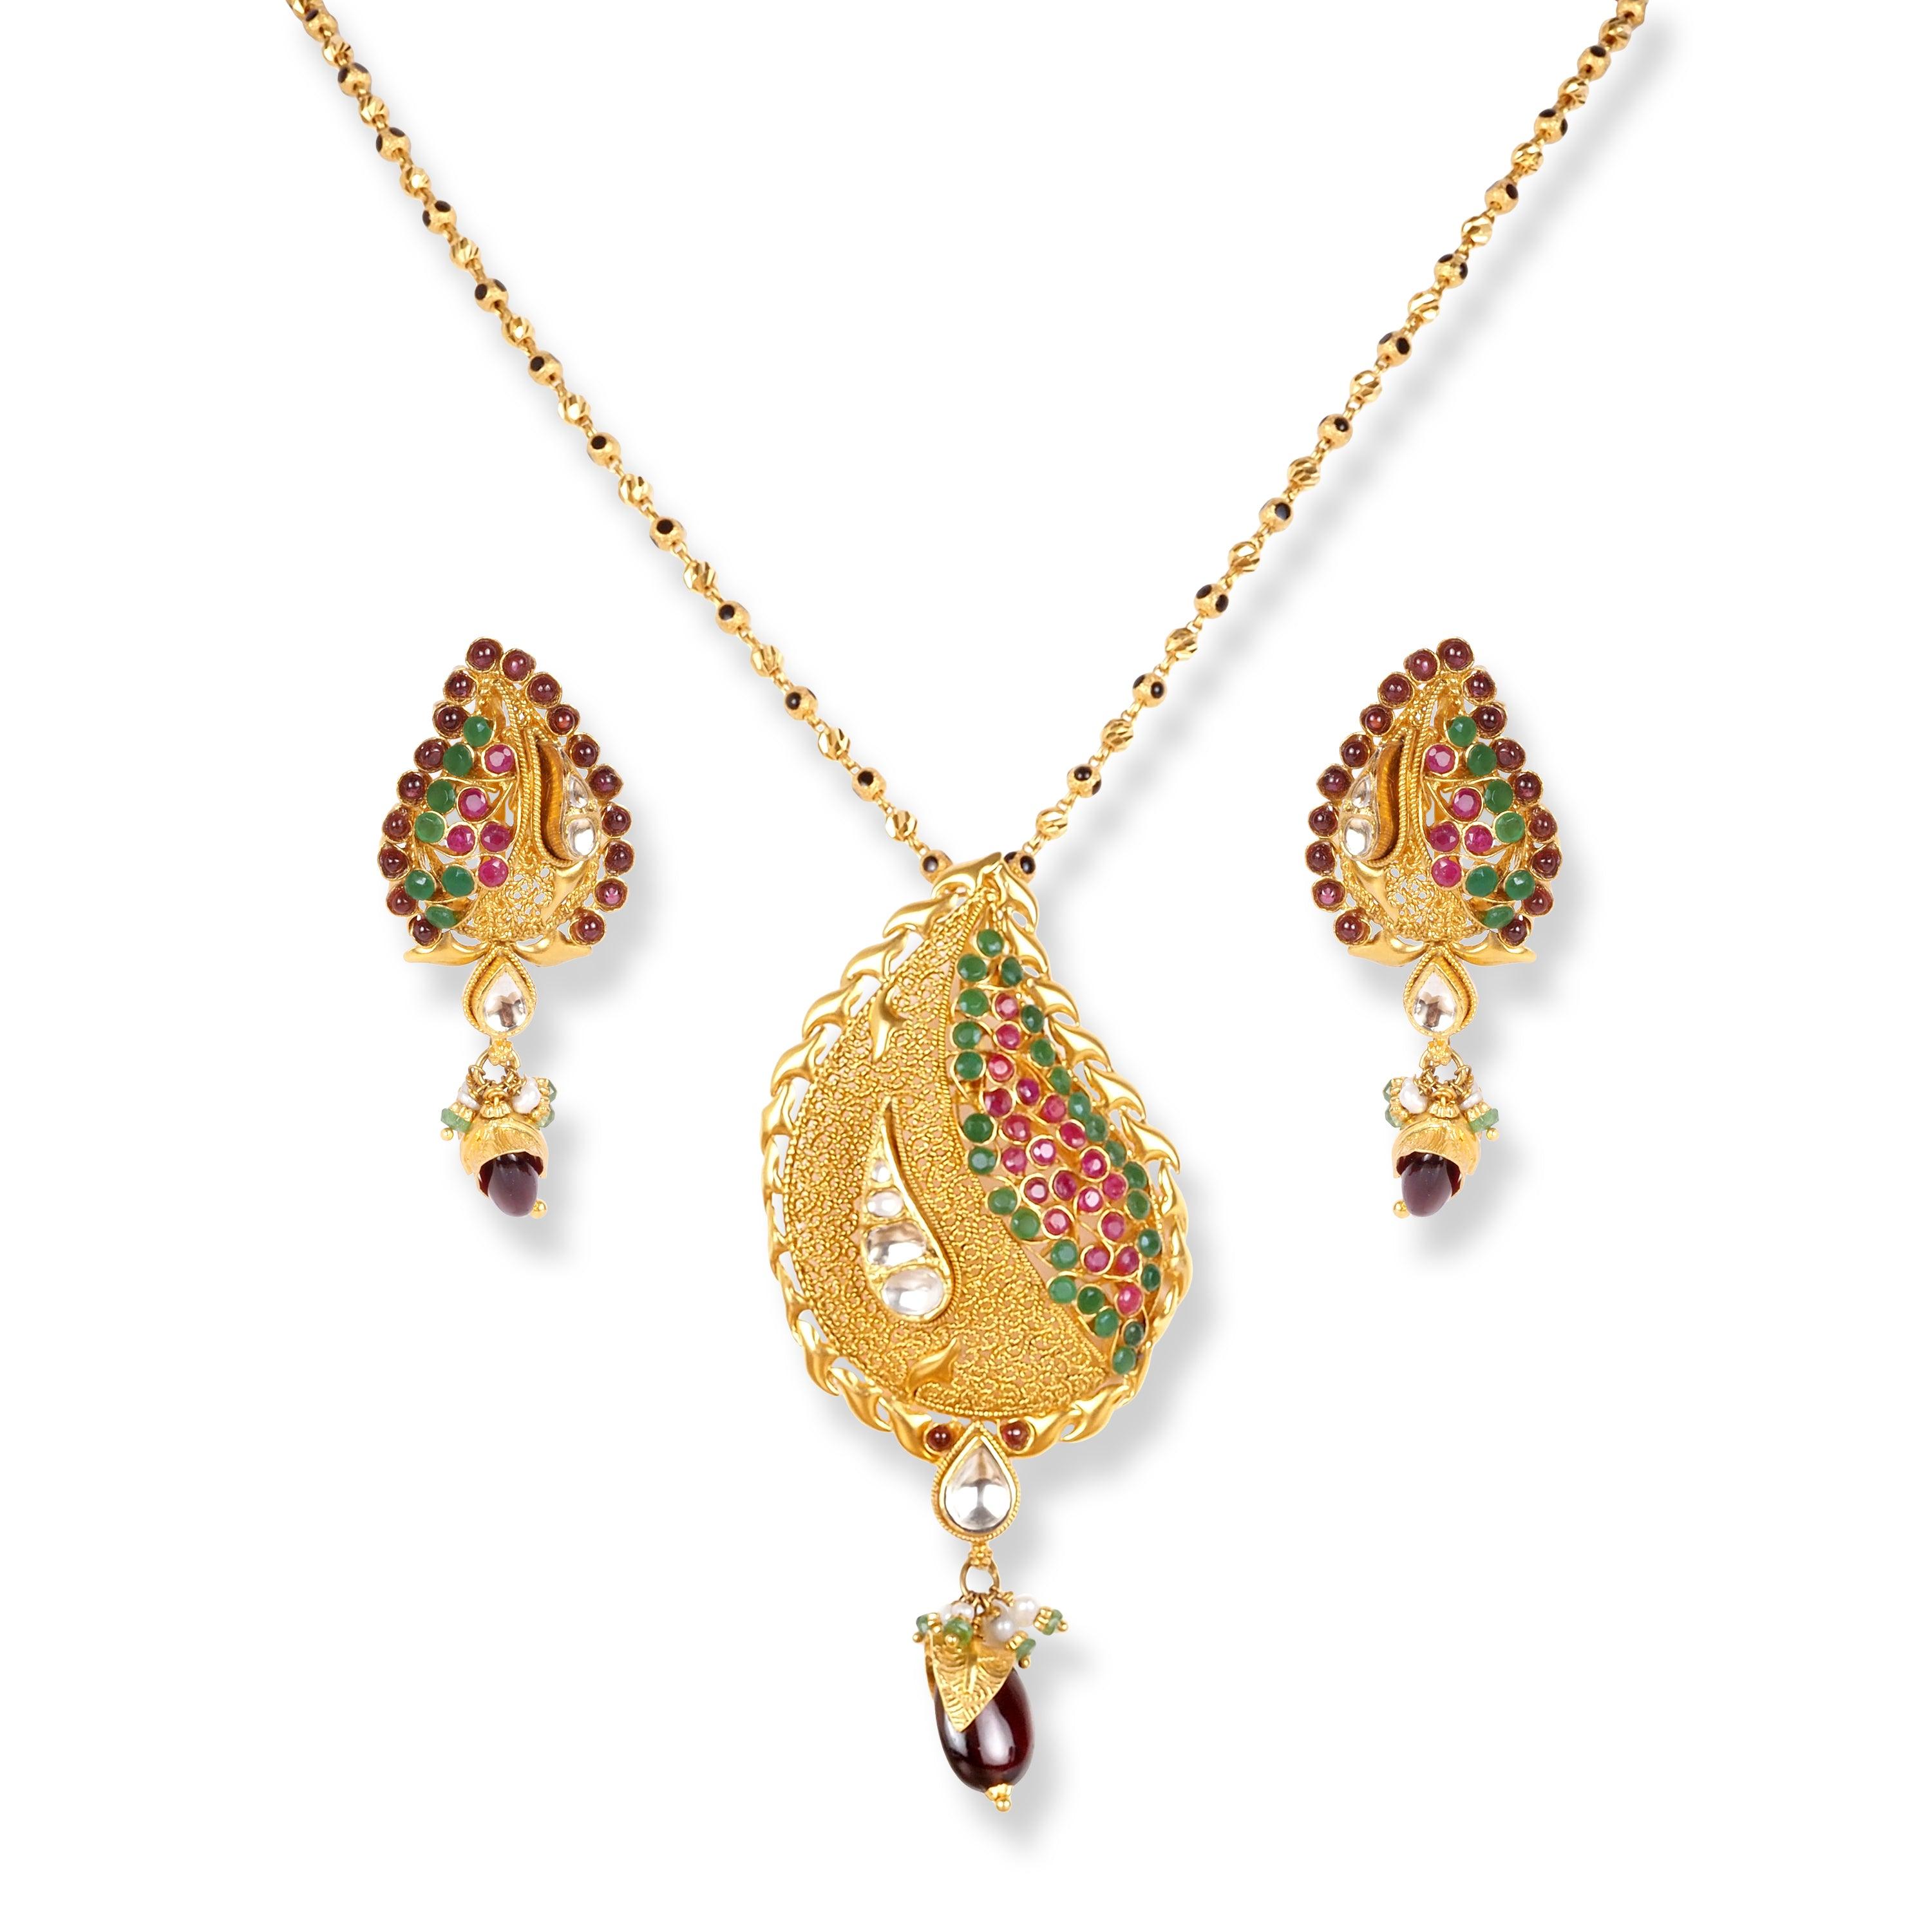 22ct Gold Antiquated Look Set with Cubic Coloured Stones NE-4983 - Minar Jewellers